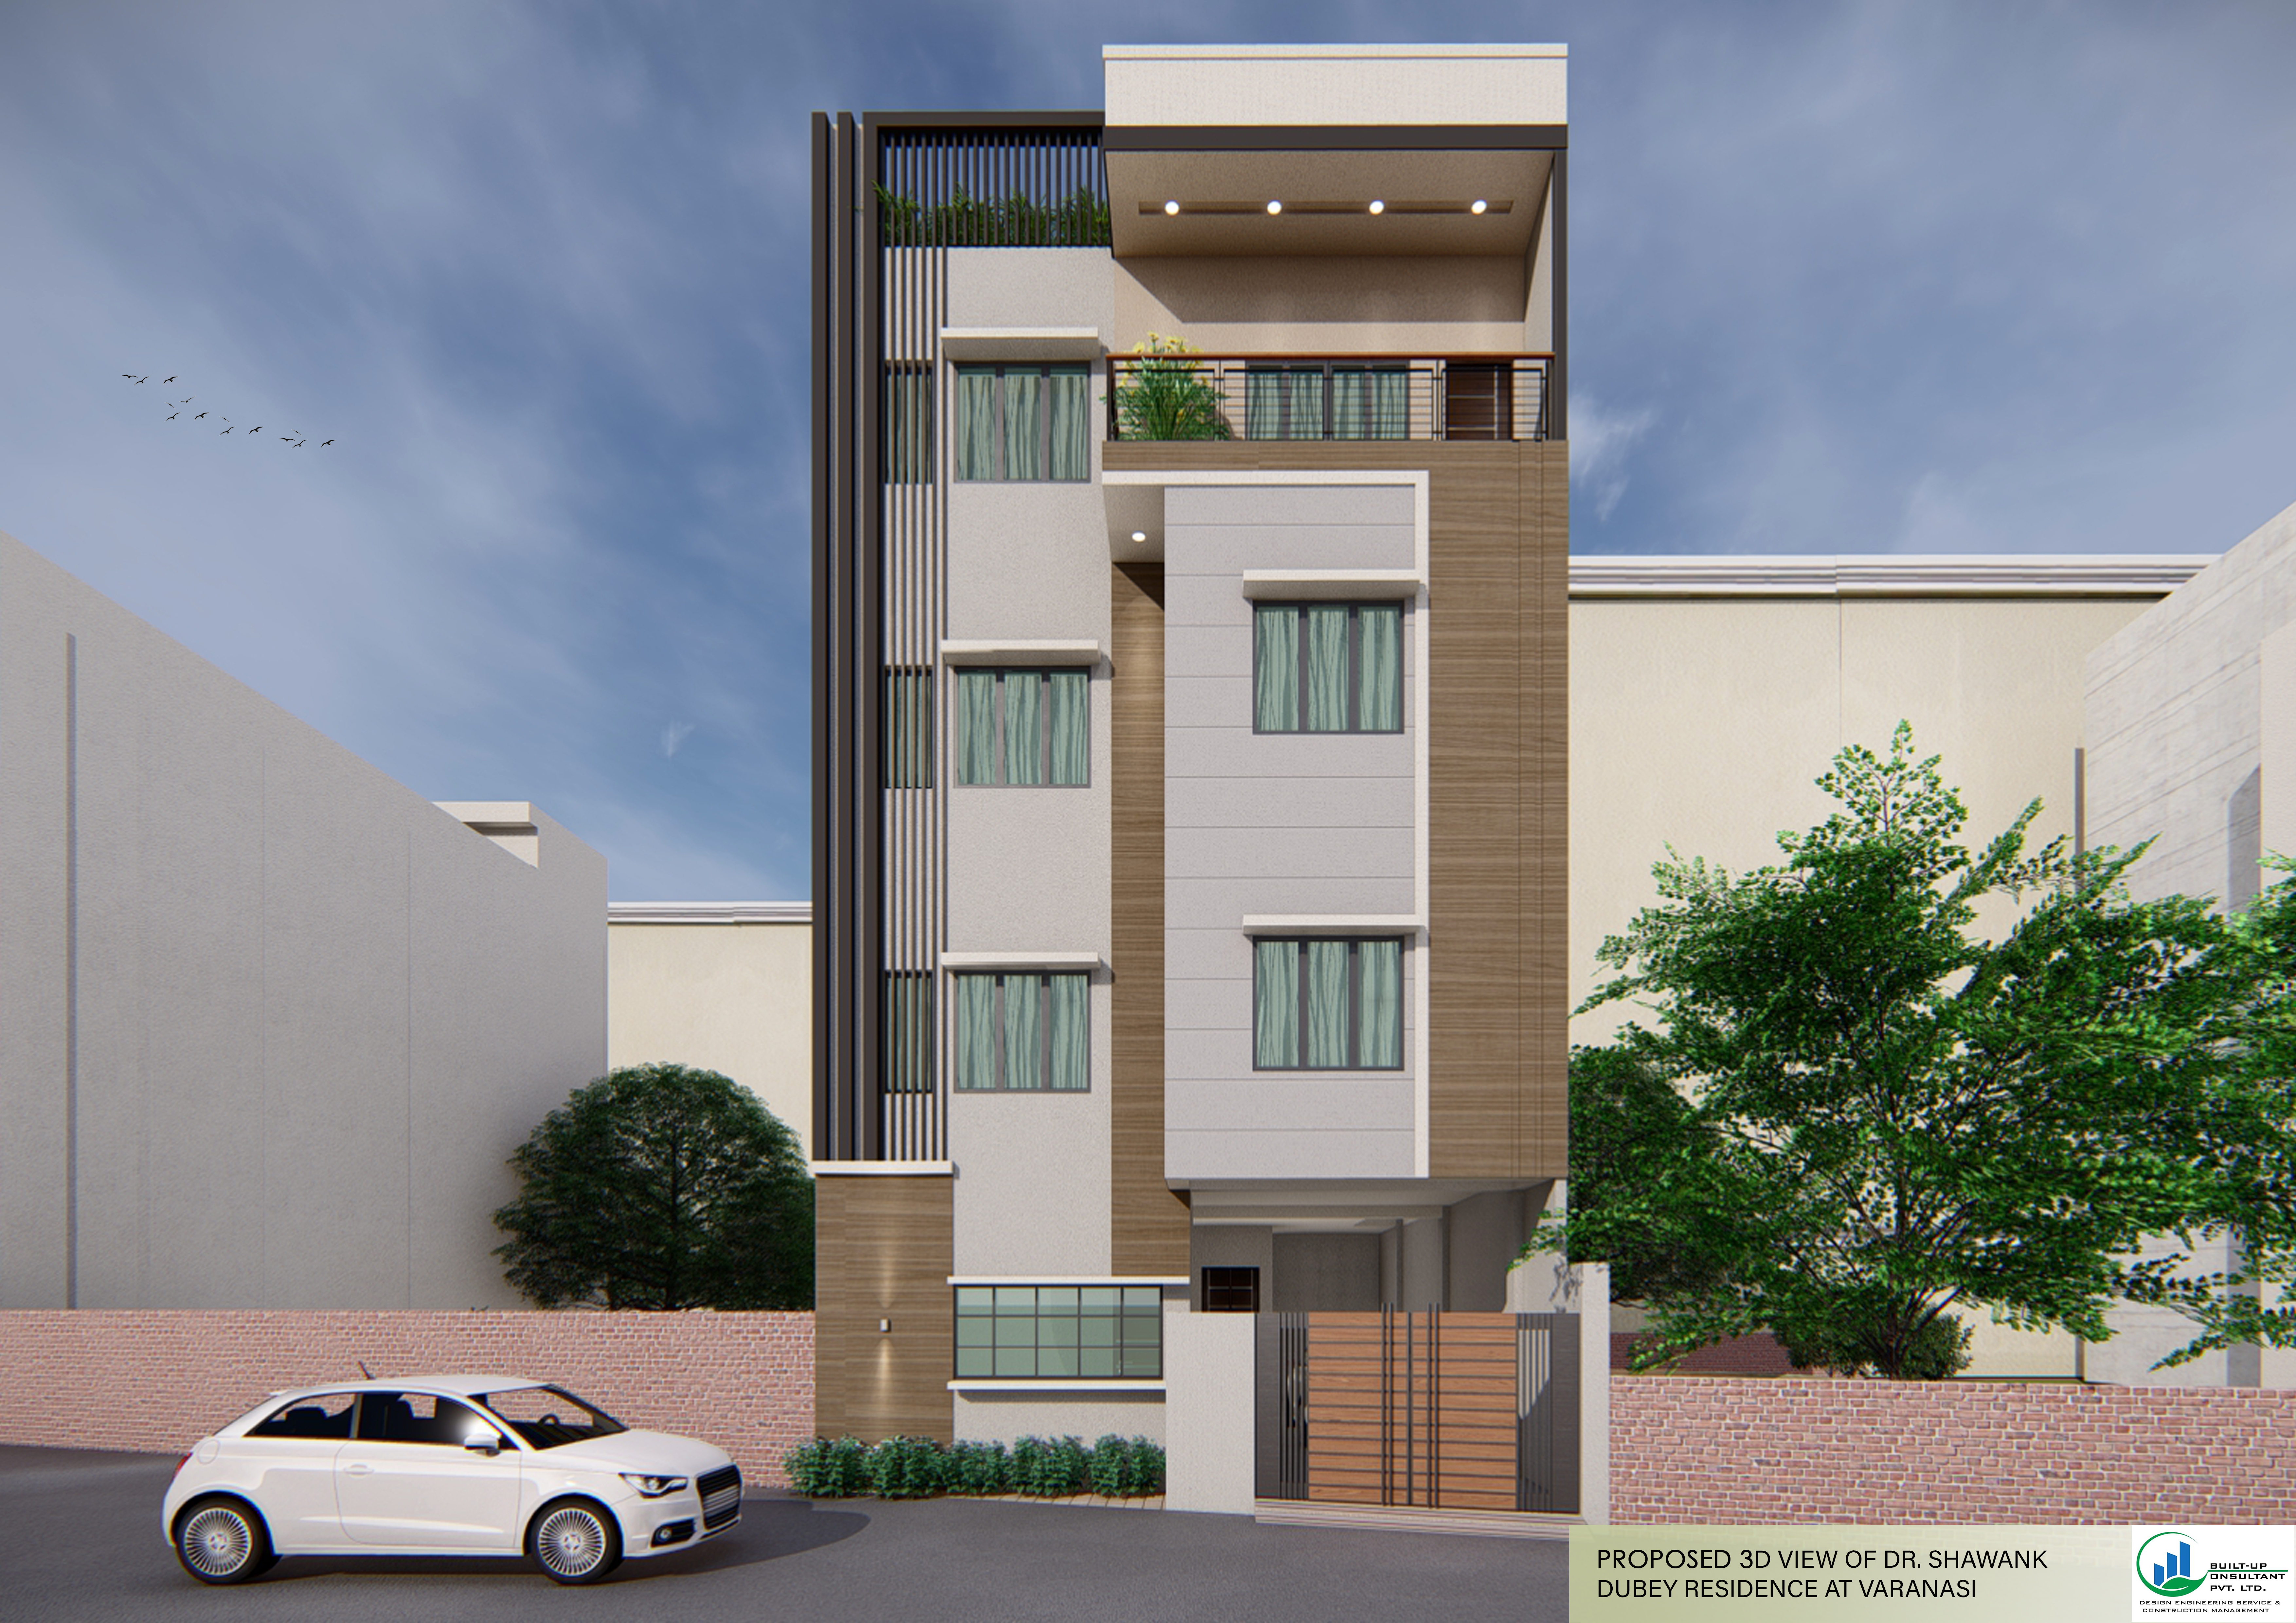 Planning, Design Engineering Consultancy And Construction Management Of Residential Building At Varanasi.